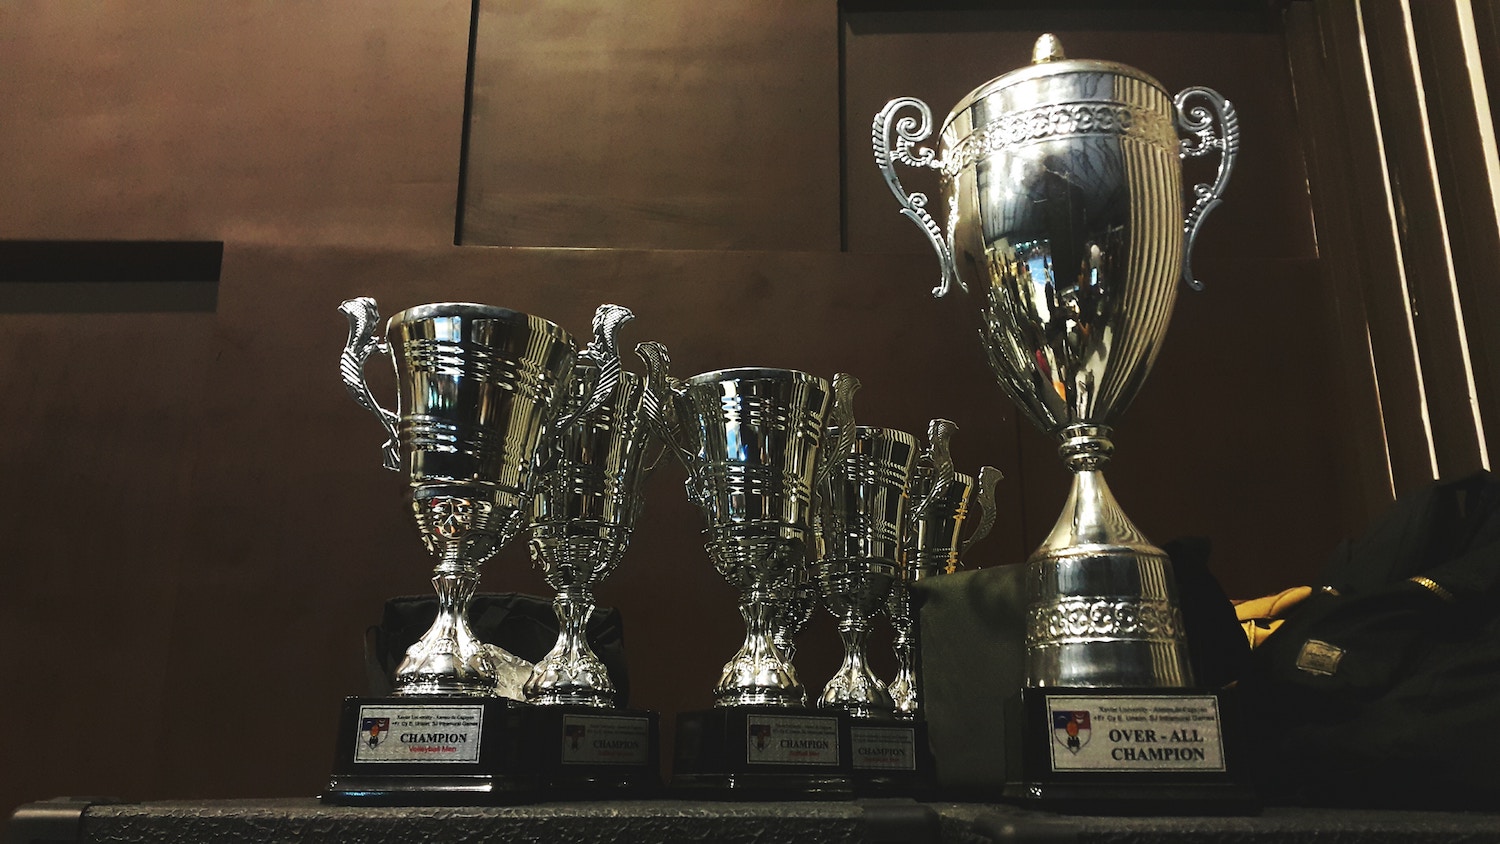 A row of silver champion trophy cups